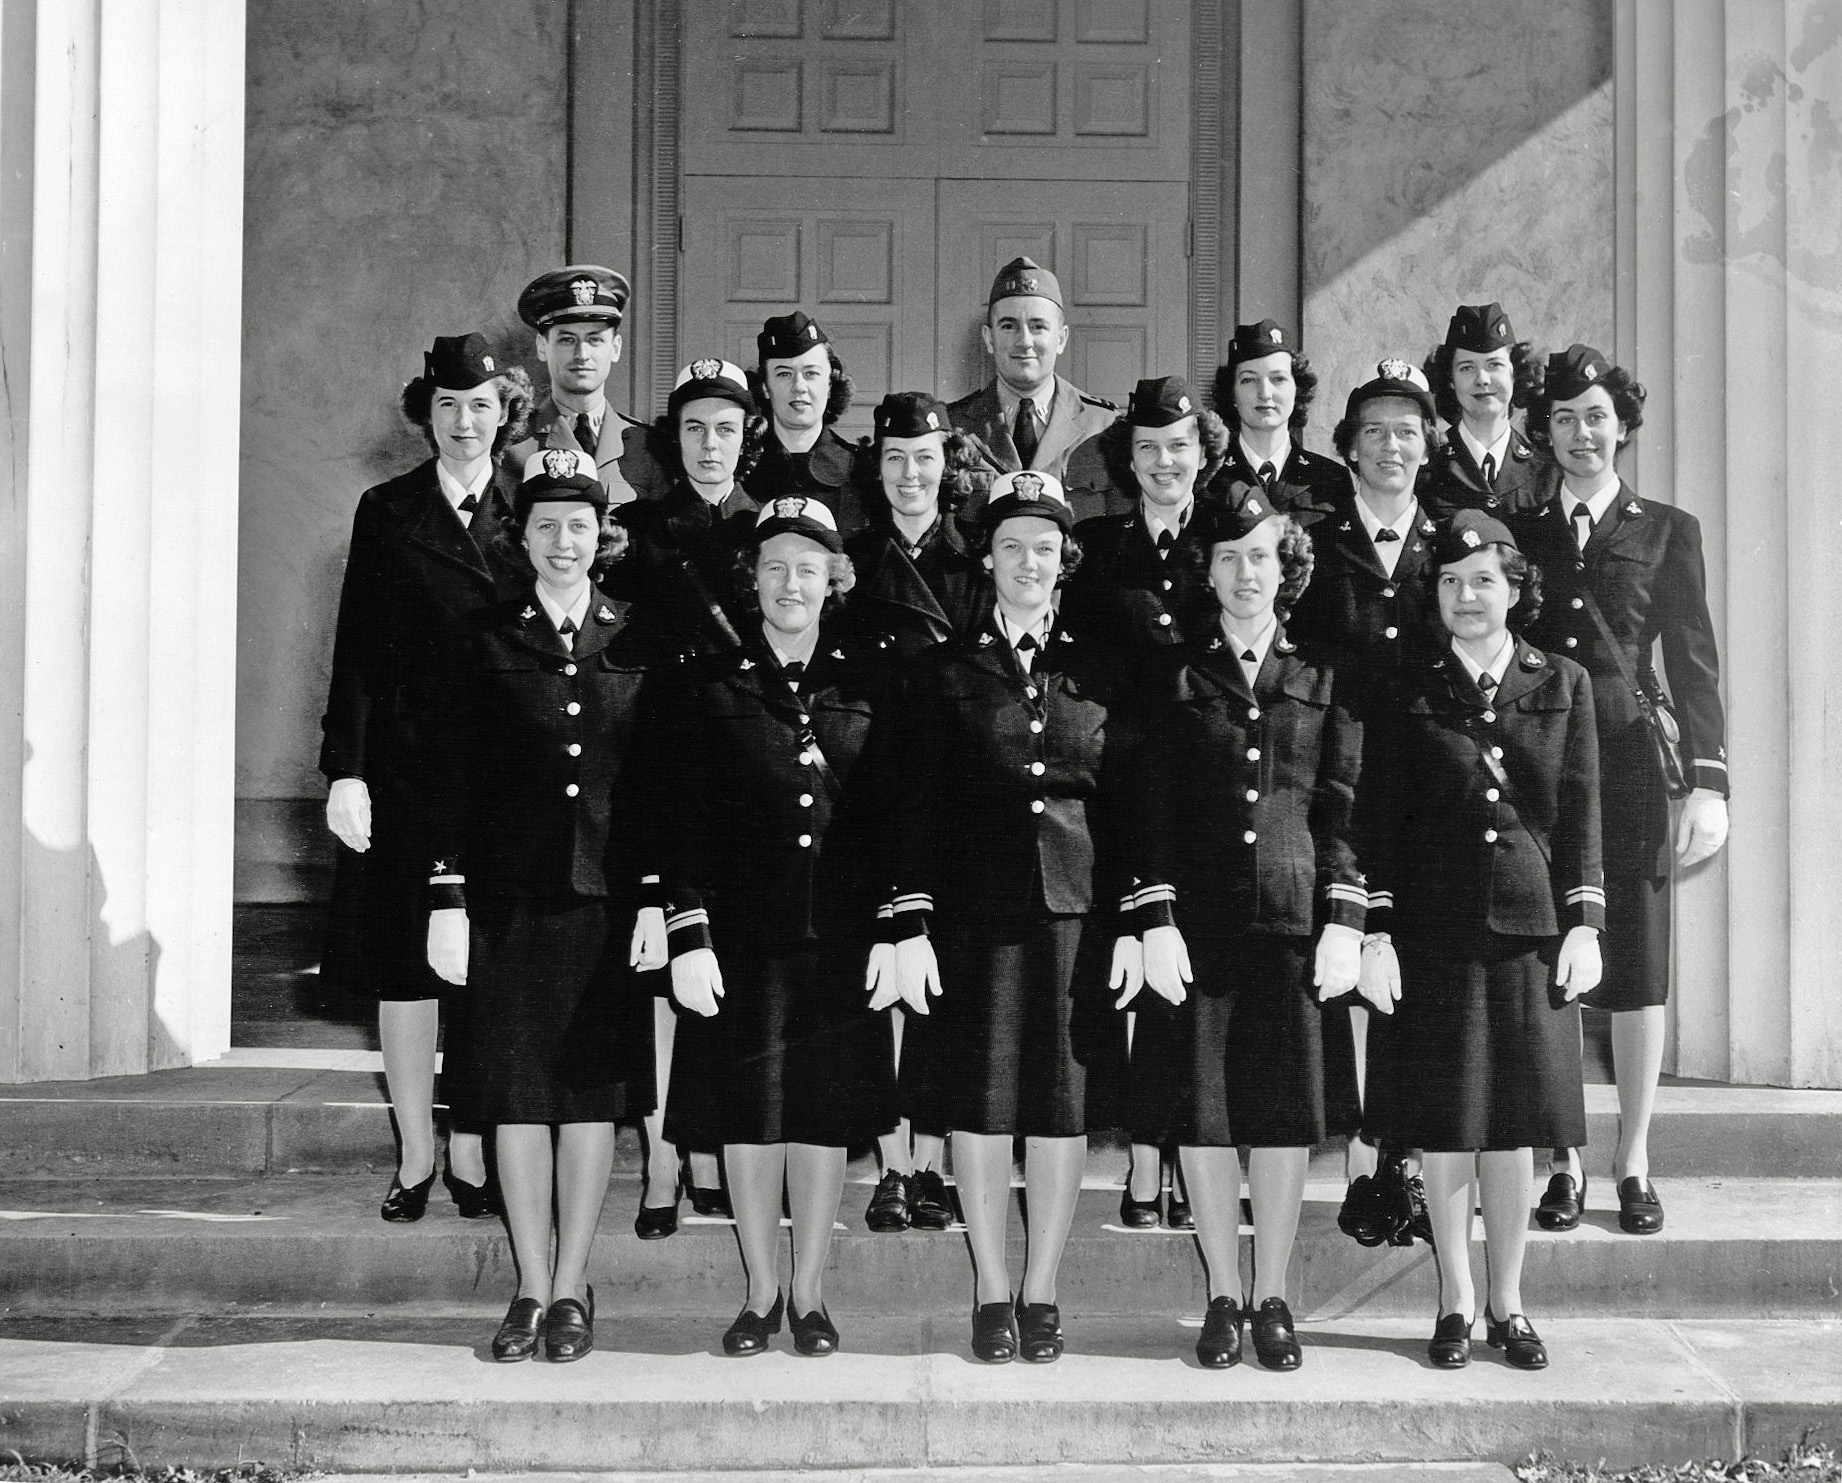 This was taken on the front steps of the Chapel of the Naval Communications Annex (the former Mt. Vernon Academy), 3801 Nebraska Ave, Washington, DC.  At the time it was taken, Mom (second row, second from right) was an officer in the WAVES.  We know nothing more about this photo, but we assume this was the group of people she worked with.  Perhaps one of these people is your (grand) mother or father, and you have one of the other 15 copies that must exist of this photo.  If this is the case, I'd love to hear from you.

What did she do, you ask?  Well, we're not sure of the details, and we can't ask her, because she died in 1985.  But we're pretty sure she was breaking codes, either German or Japanese ones, by machine.  She was 22 when she entered the Navy in January 1942, the child of a well-to-do Boston family (her dad was a surgeon, her mother a society lady).  She served throughout the war, worked at CIA for a while, got married and then became a housewife and mother.   She remained very quiet about this work for the rest of her life, and my brother and I never grilled her about it.  Now we wish we had asked a few more questions. View full size.